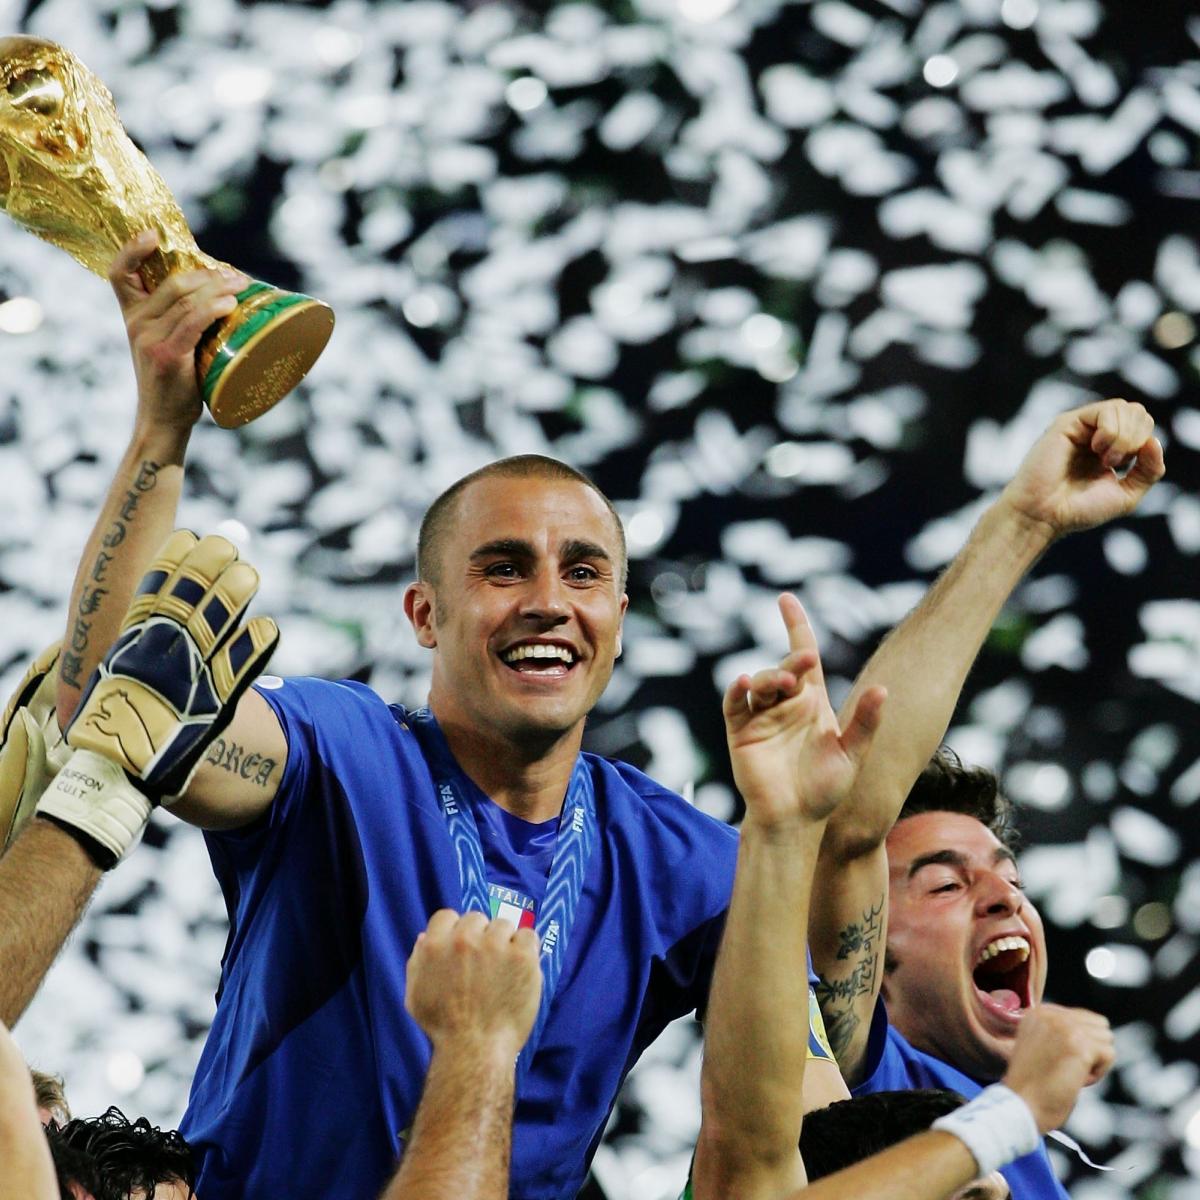 Italy vs France: Where the 2006 World Cup Winners Are Today